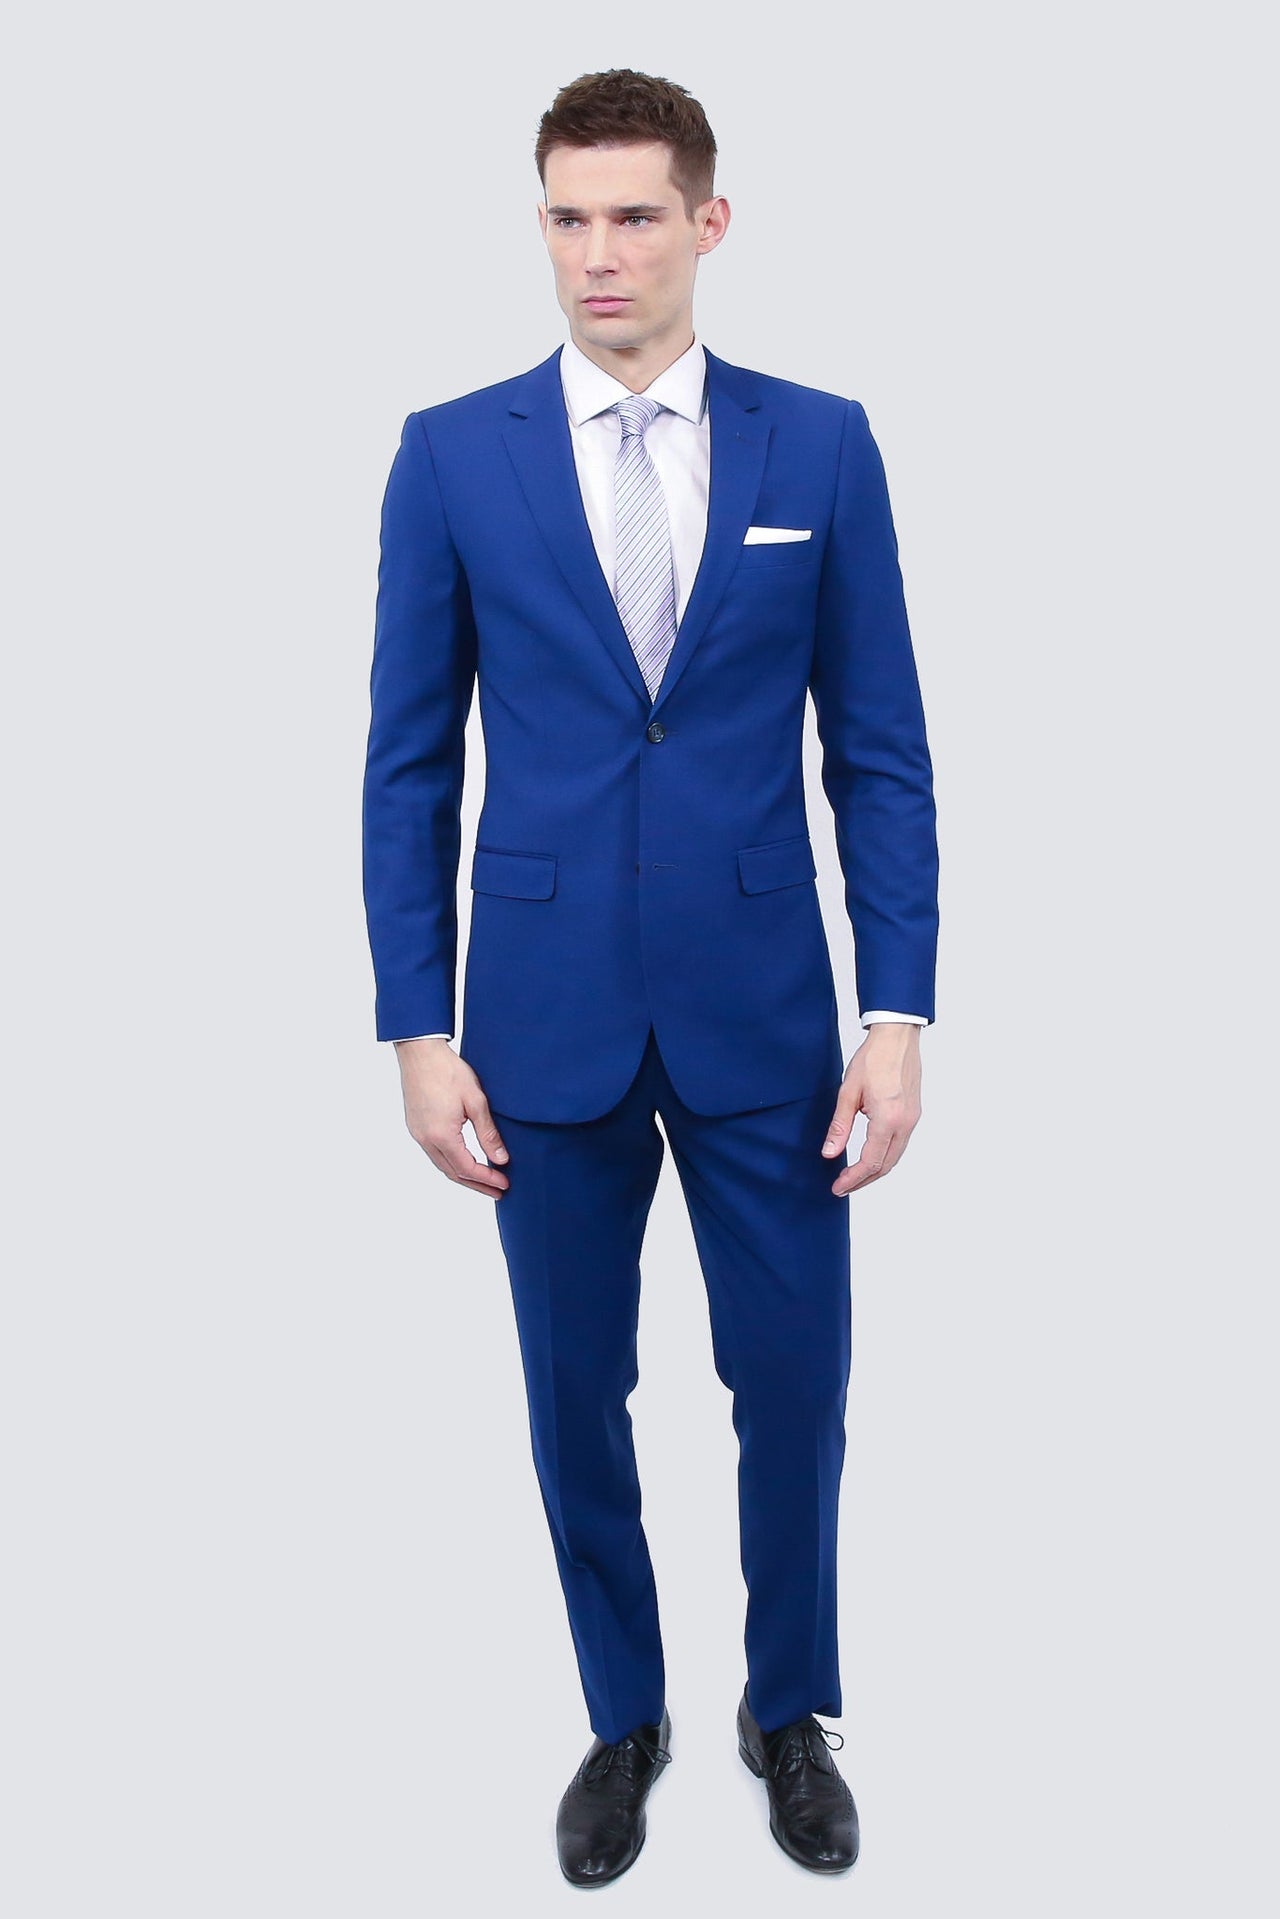 Navy Blue Three-piece Suit for Men for Every Occasion Tailored Fit